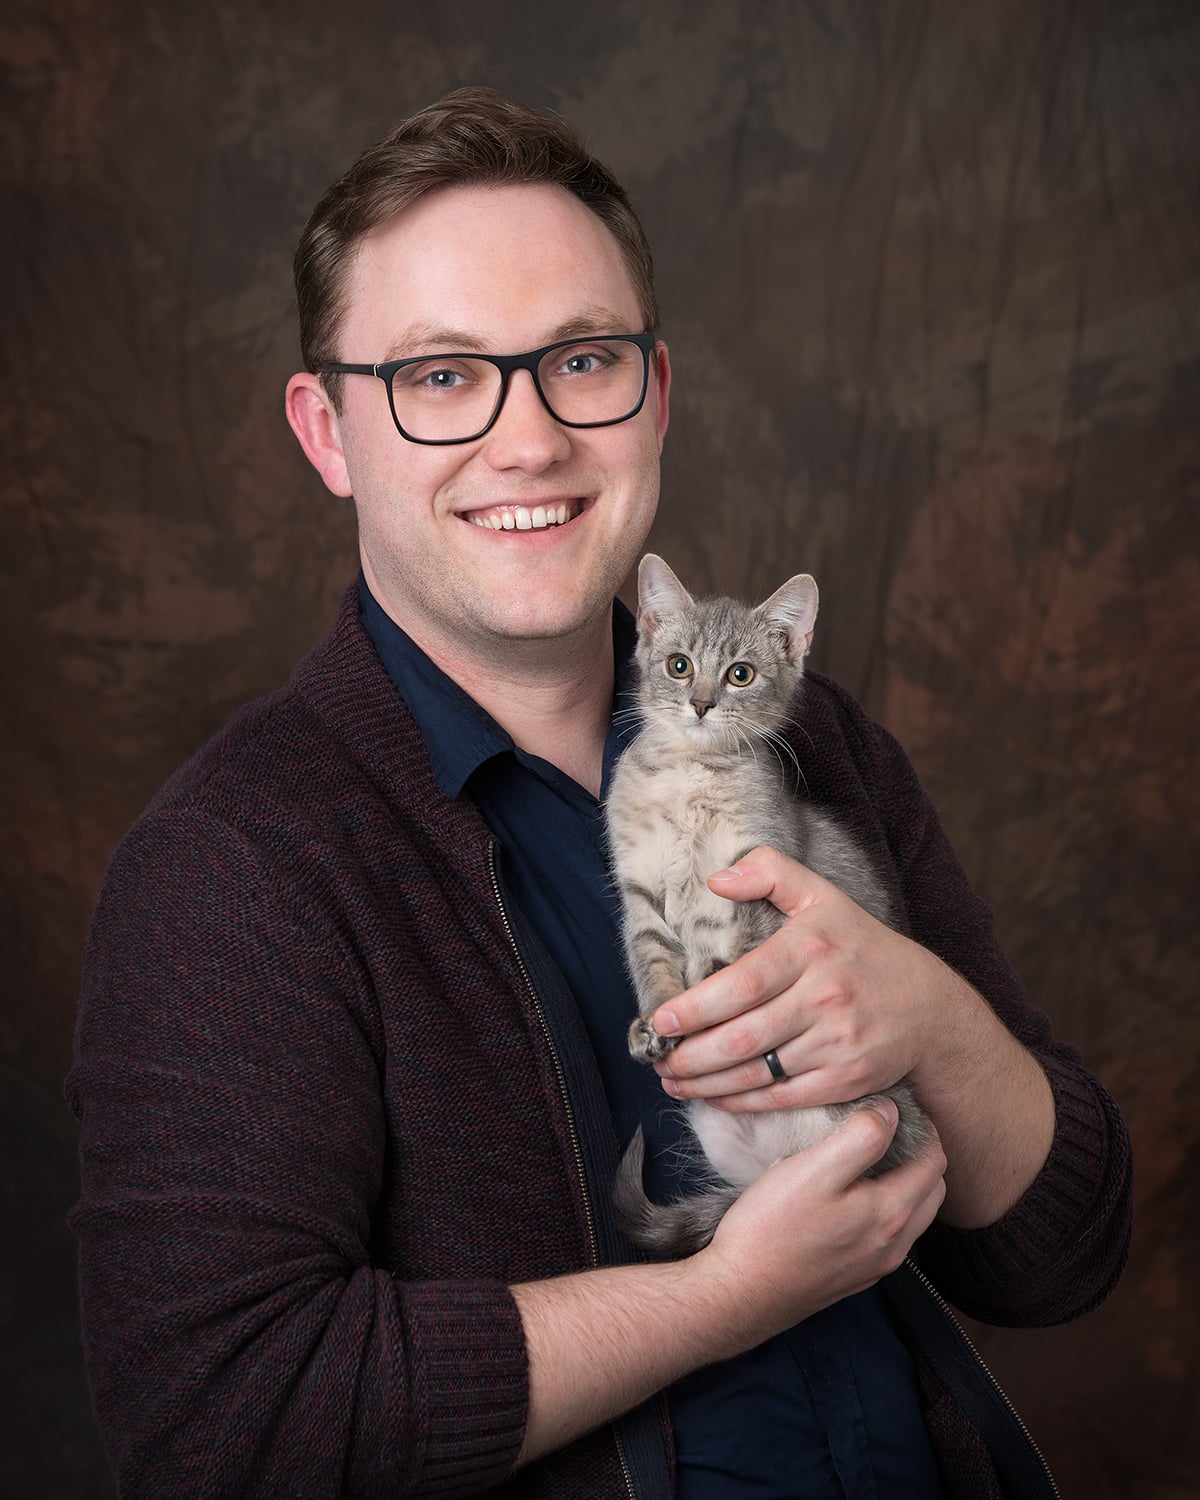 Headshot of Josh Kneeland in a blue button-up shirt and dark-colored cardigan. He wears glasses and is holding a gray kitten.